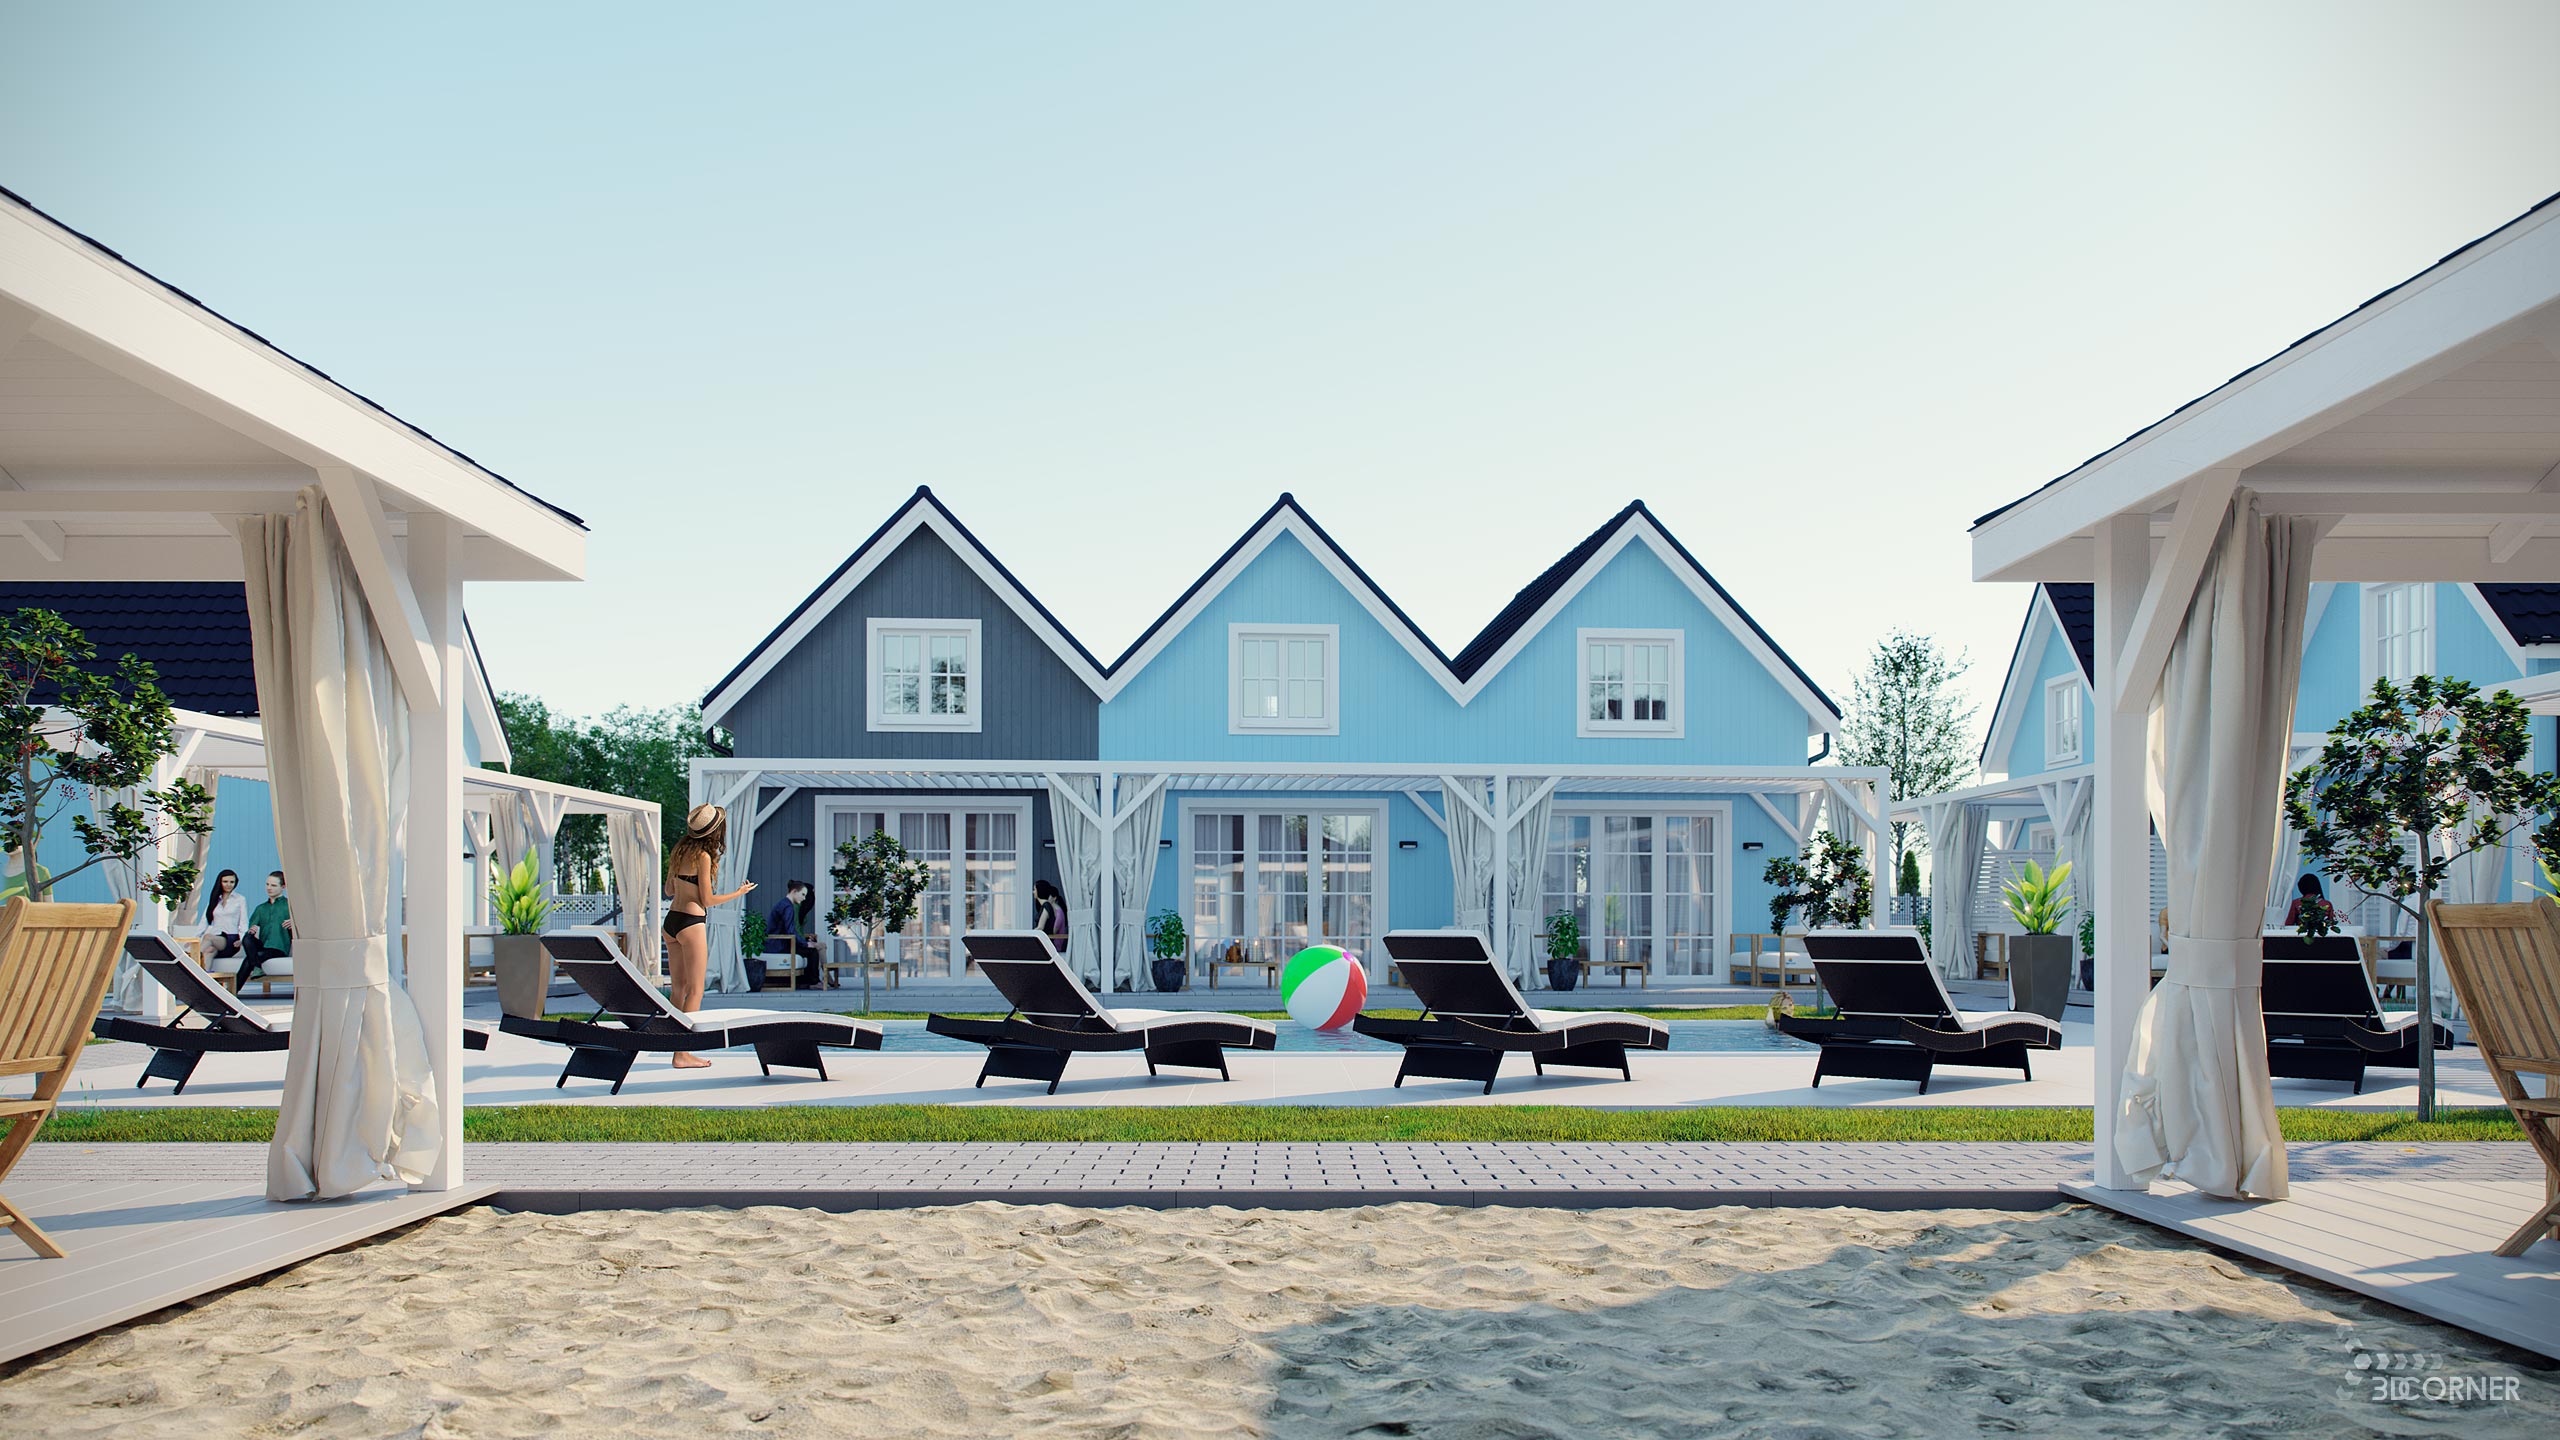 Architectural visualization of contemporary holiday resort near Baltic Sea